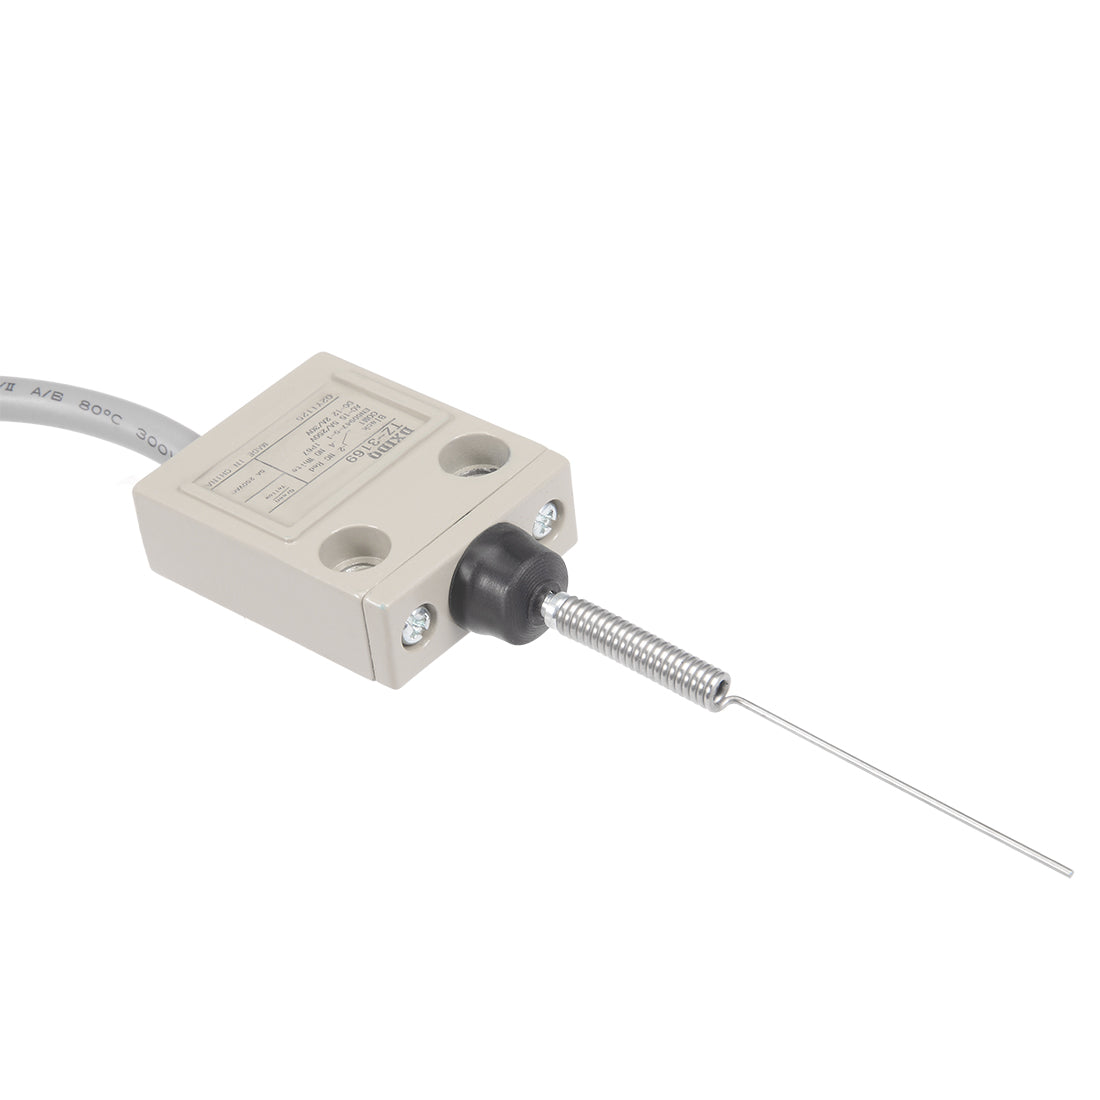 uxcell Uxcell TZ-3169 Cat Whisker Flexible Coil Spring Limit Switch Momentary Compact Prewired 1NC+1NO